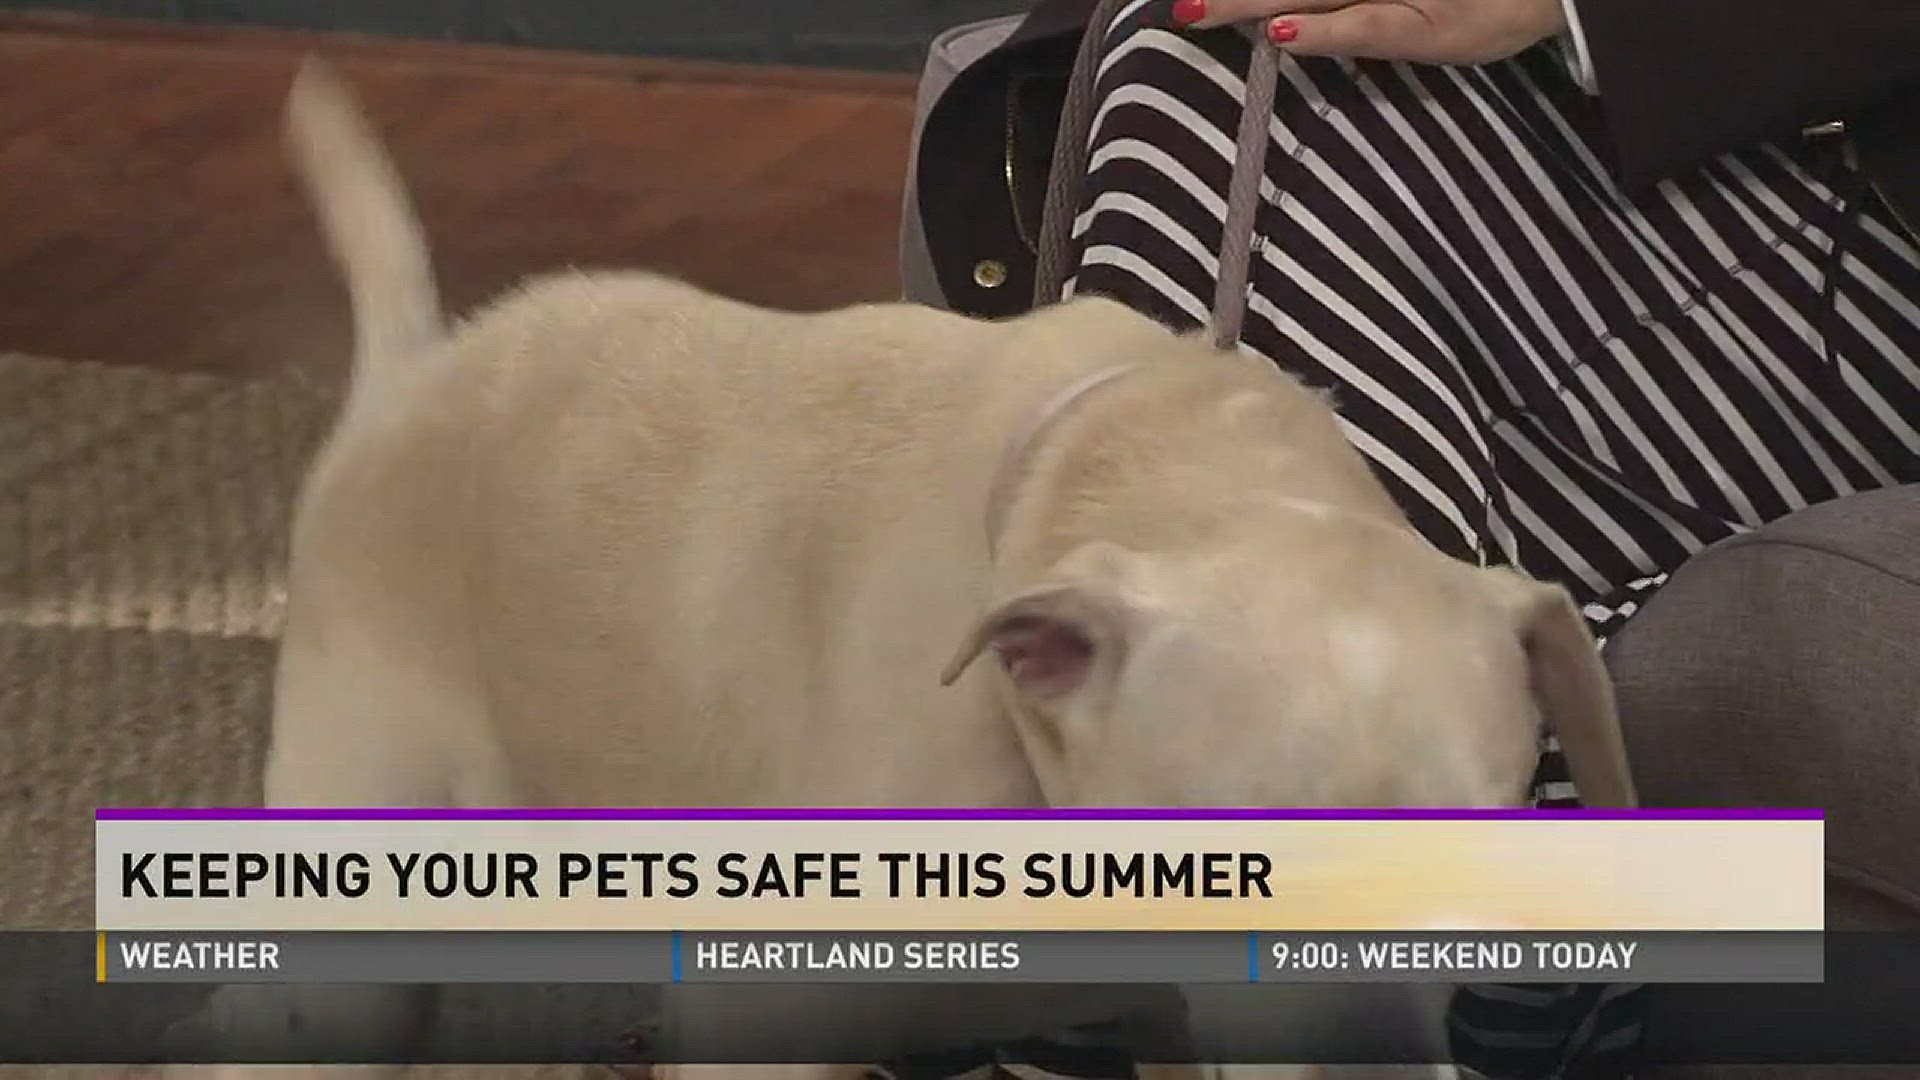 Young-Williams brings by Ty. Janet also reminds you how to keep your pets safe during the heat.